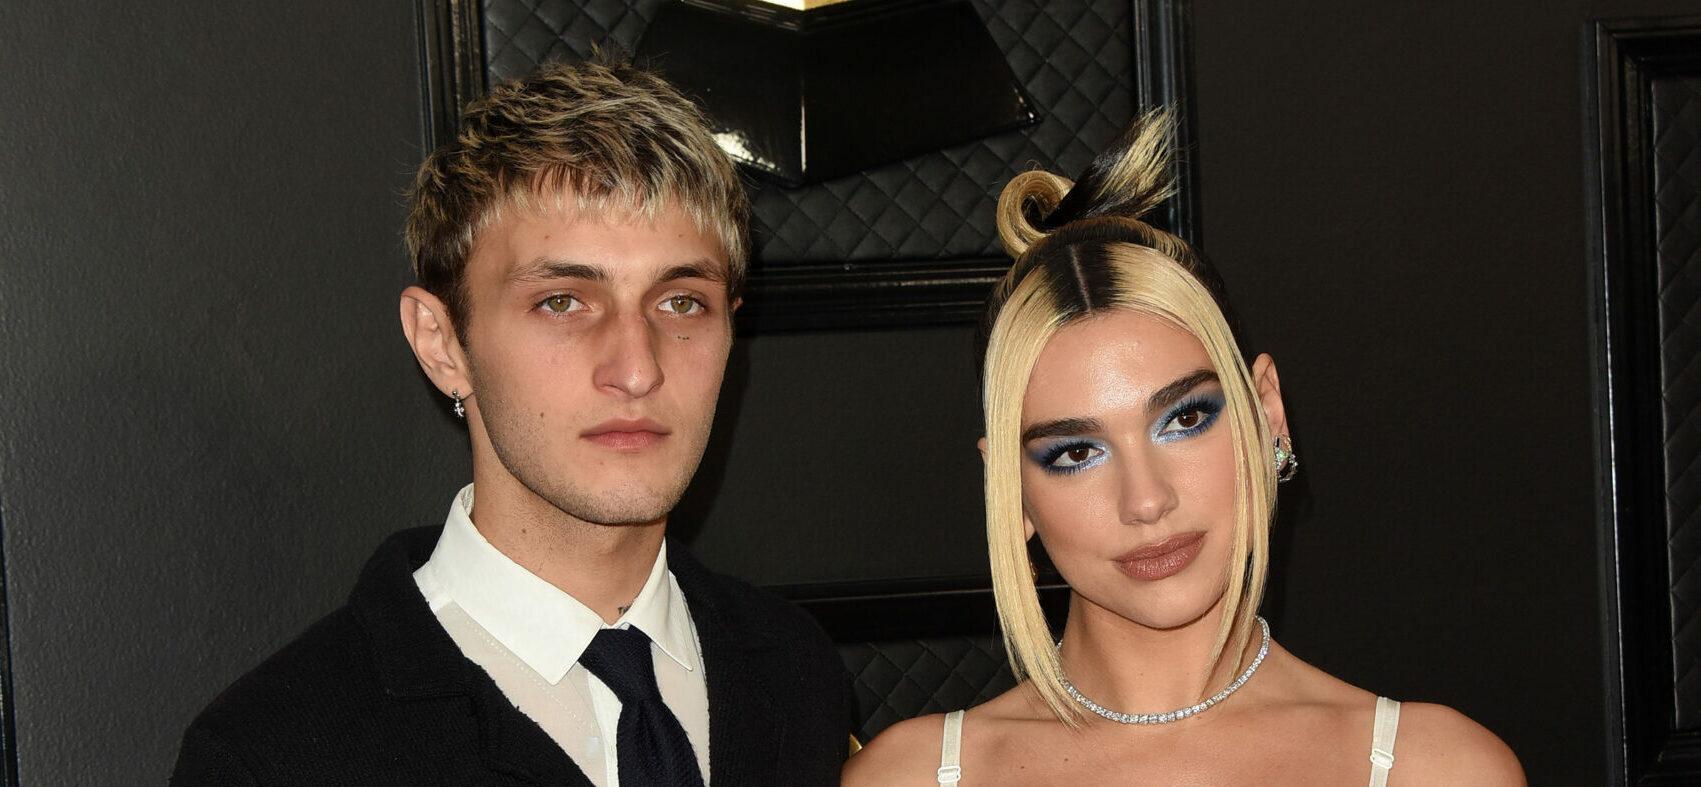 Dua Lipa And Anwar Hadid Go On A ‘Break’ After Two Years Of Dating